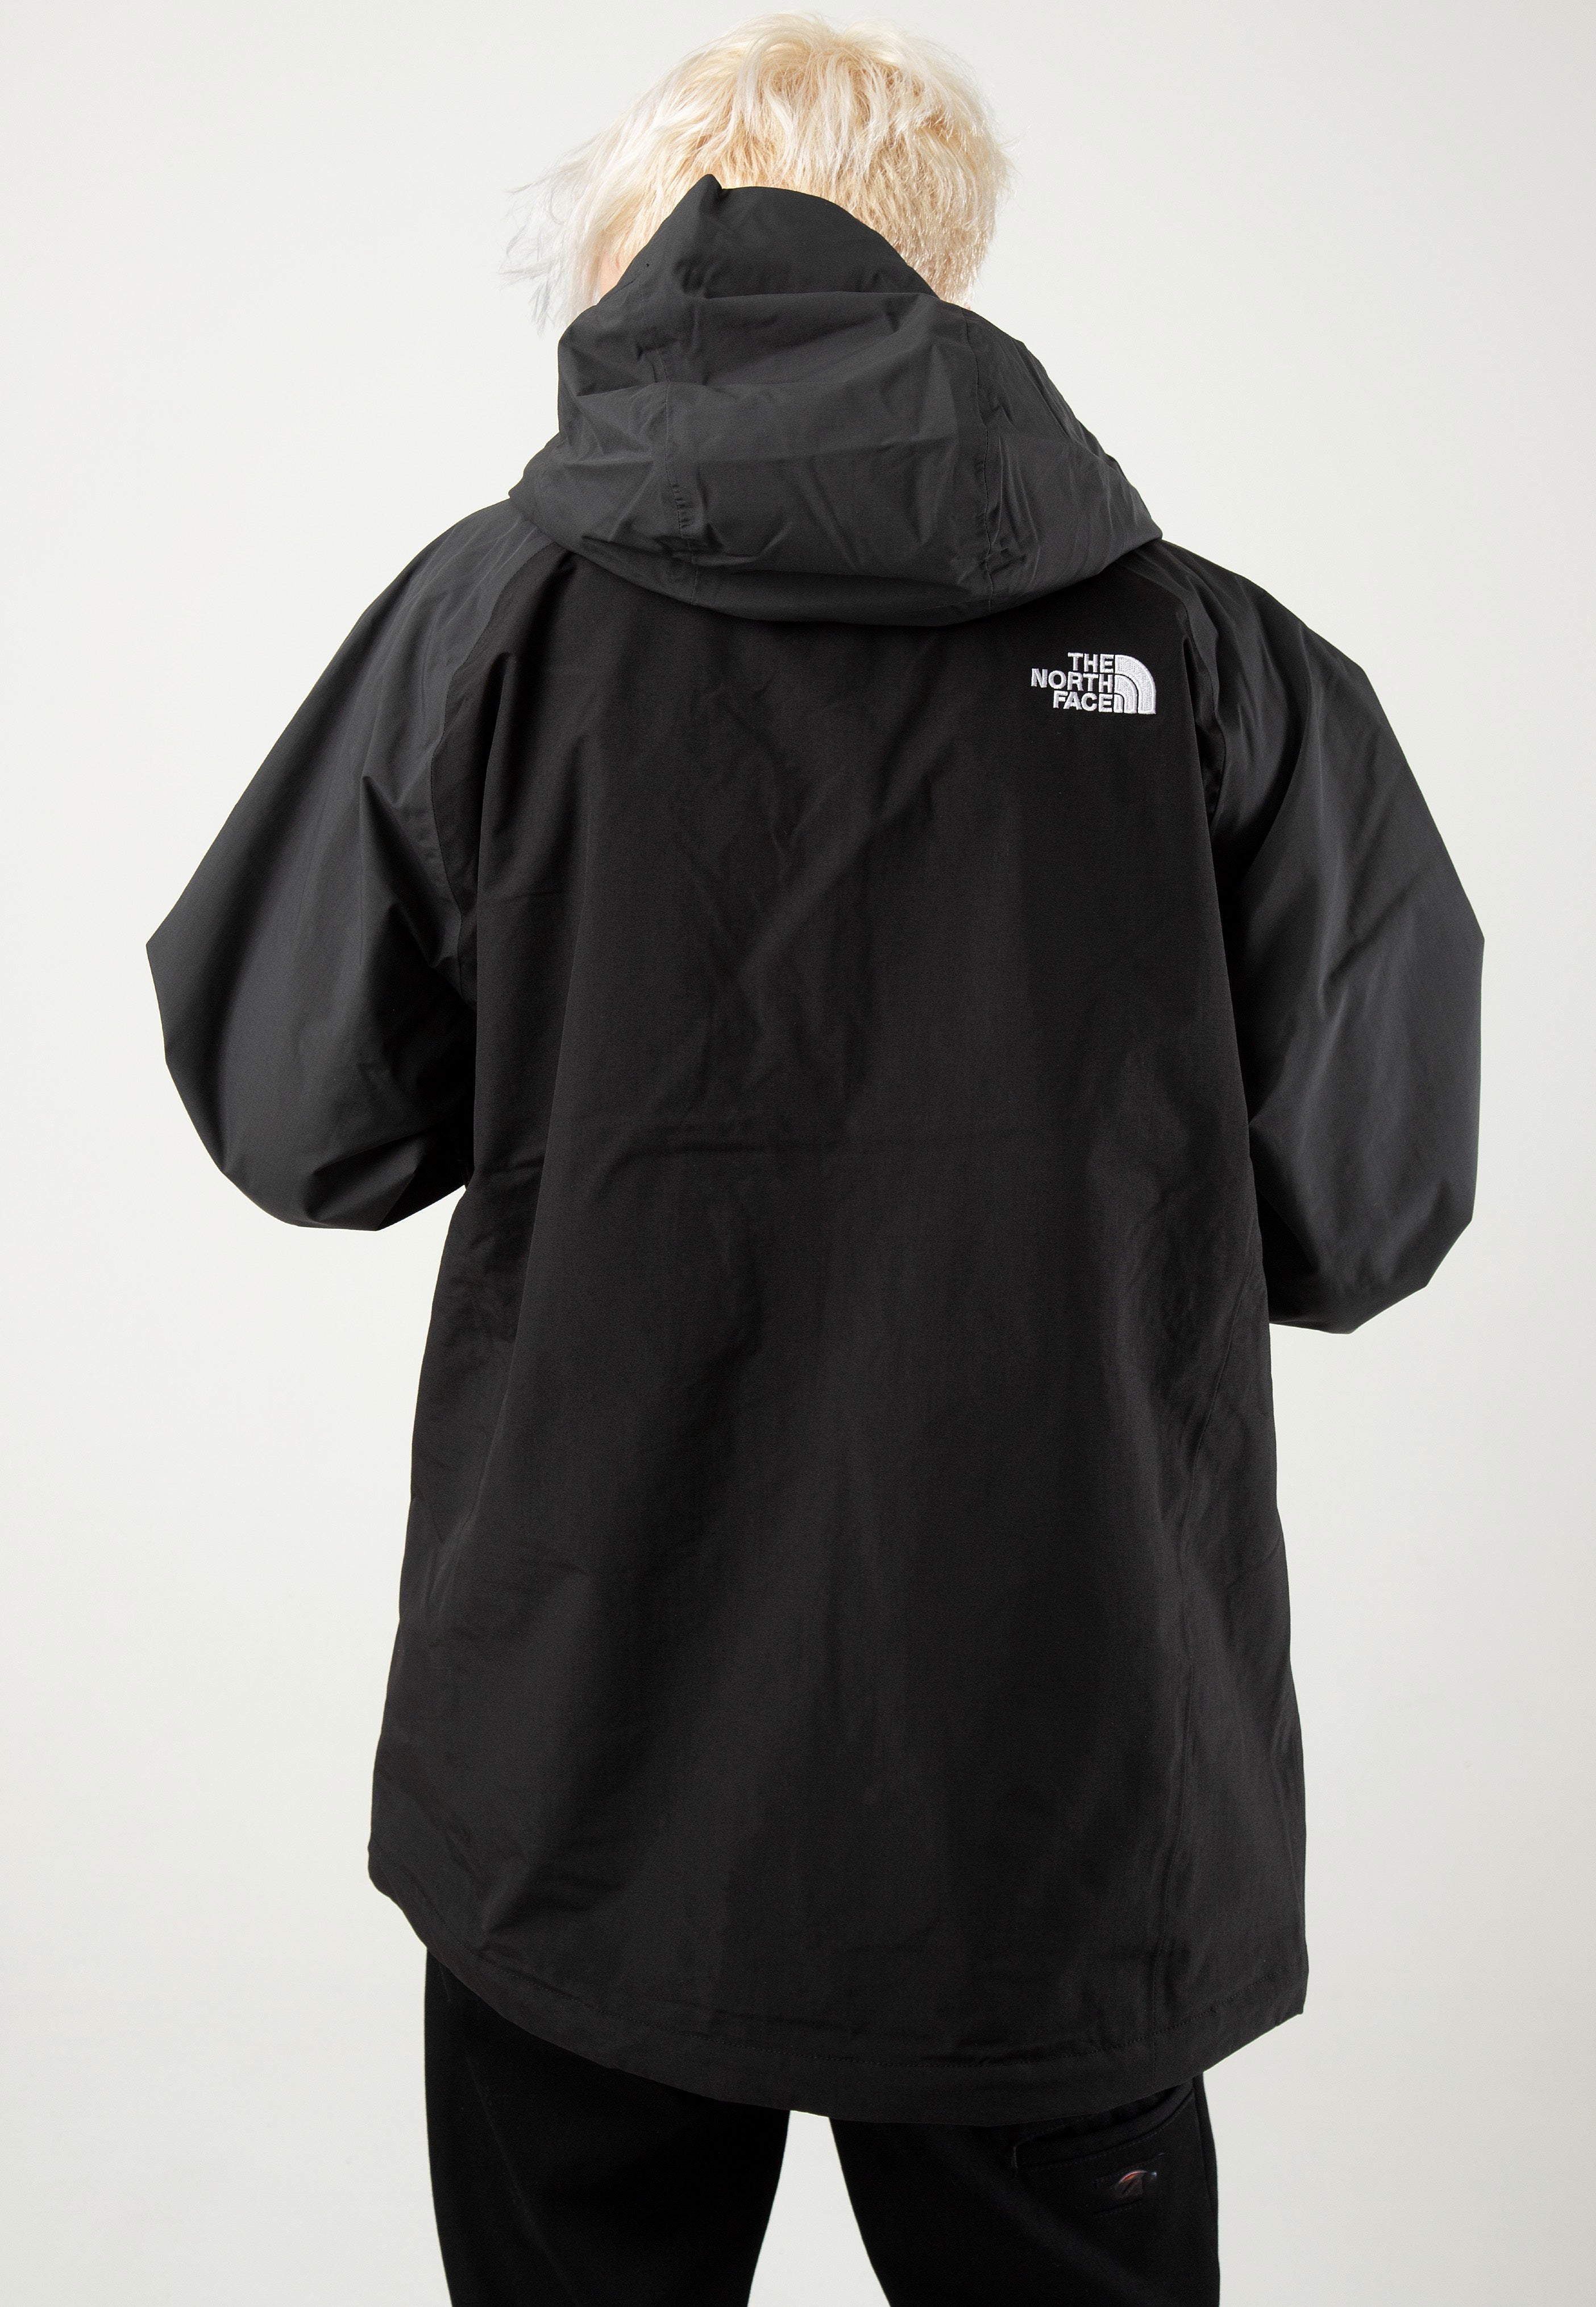 The North Face - Stratos Orl1 - Jacket